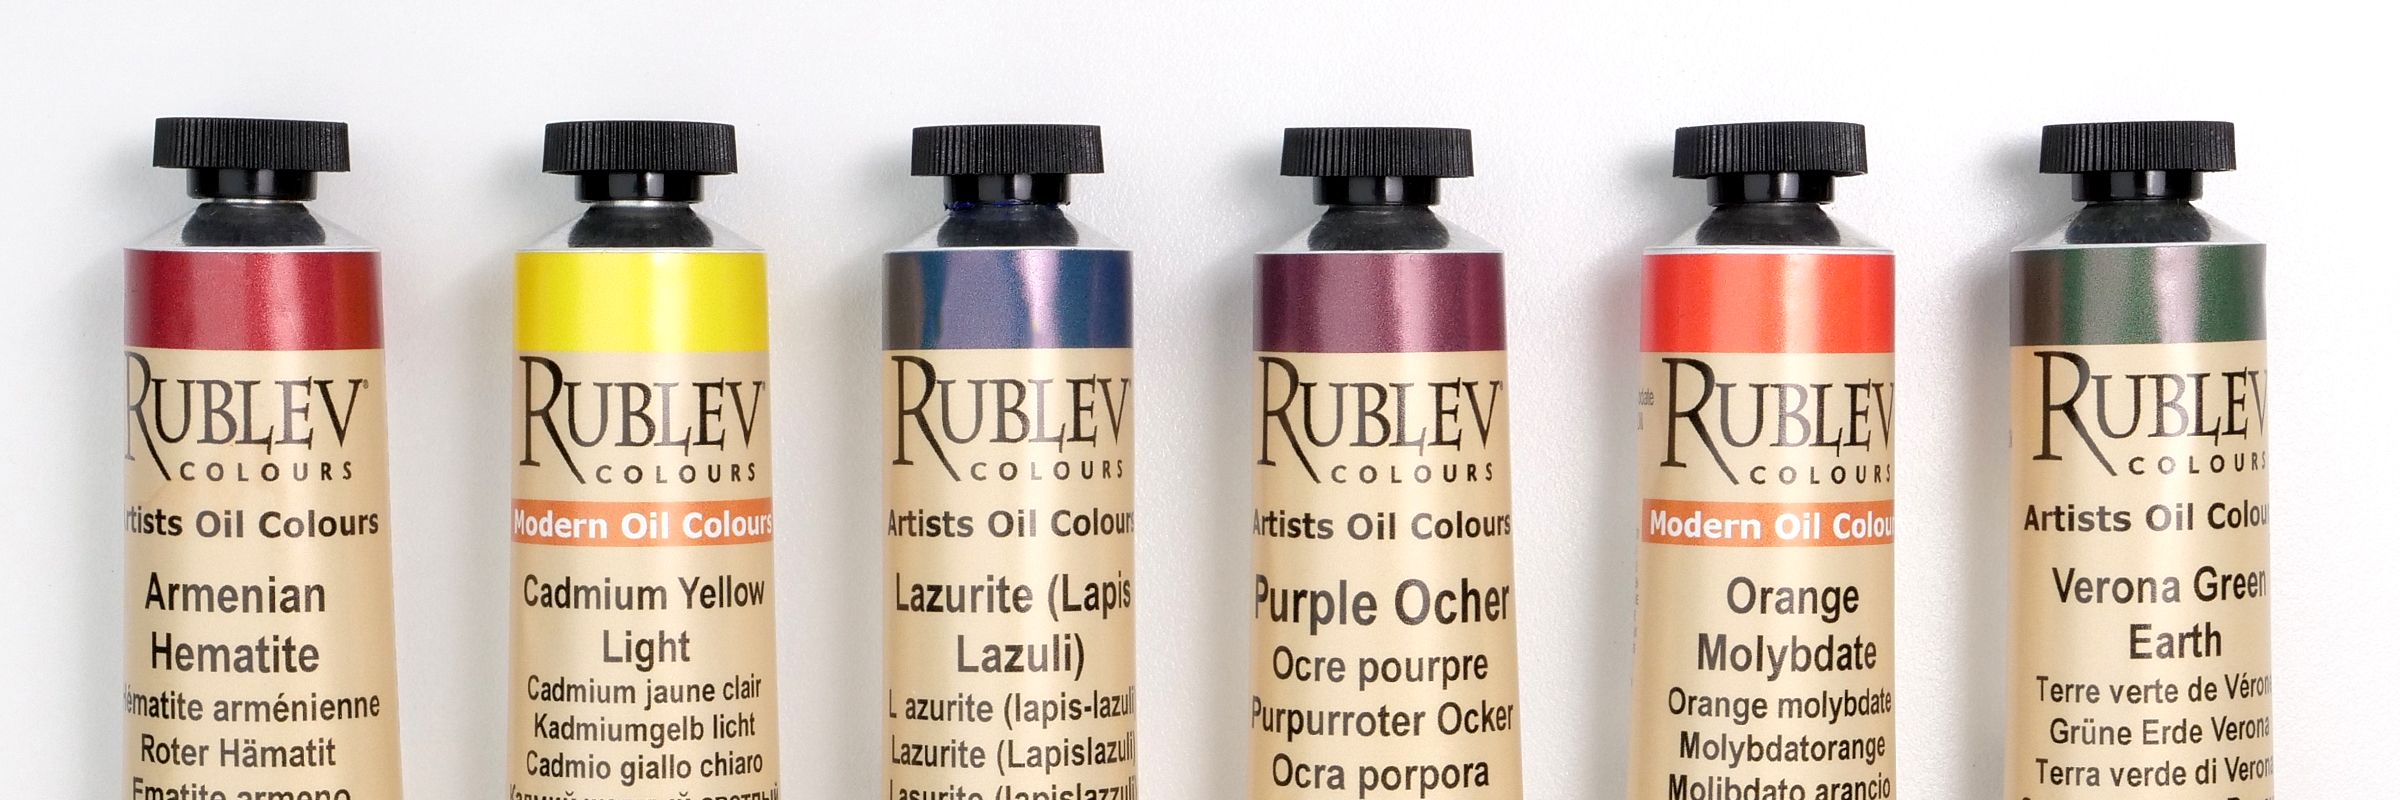 Rublev Colours Artists Oils and Watercolors